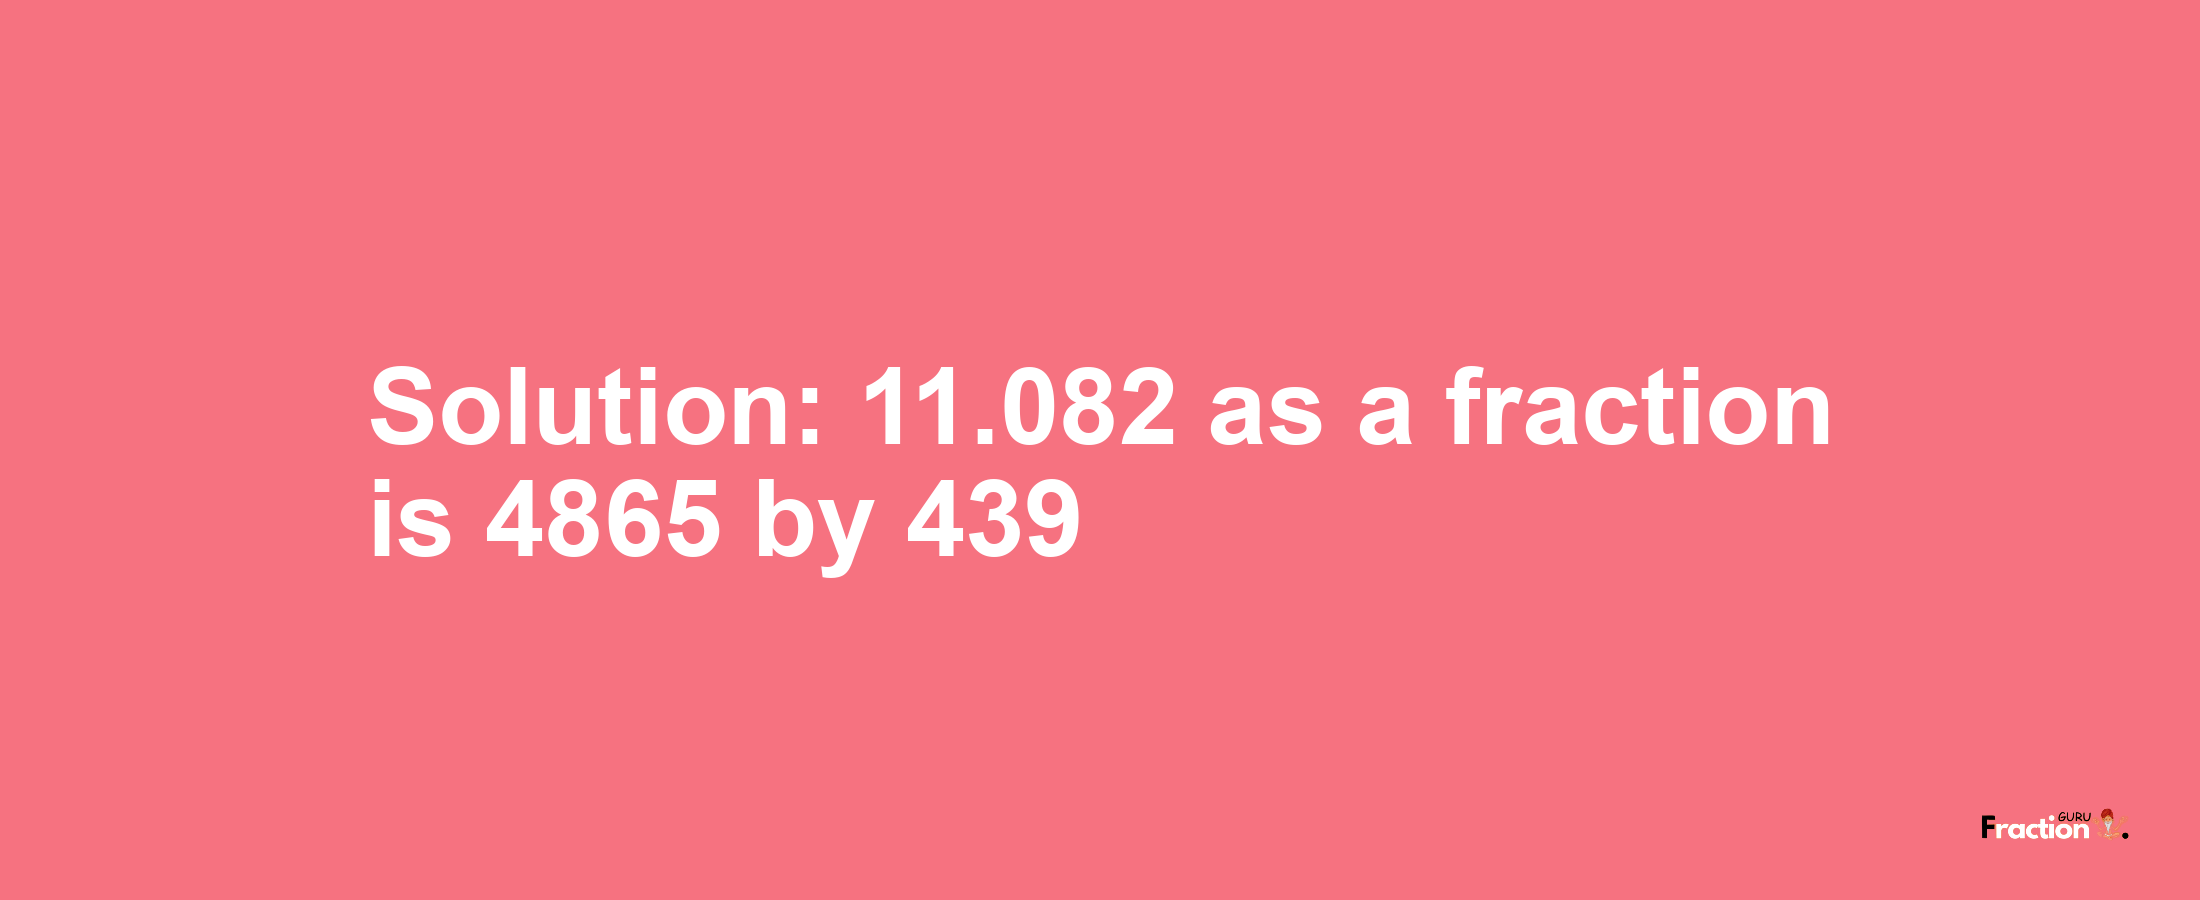 Solution:11.082 as a fraction is 4865/439